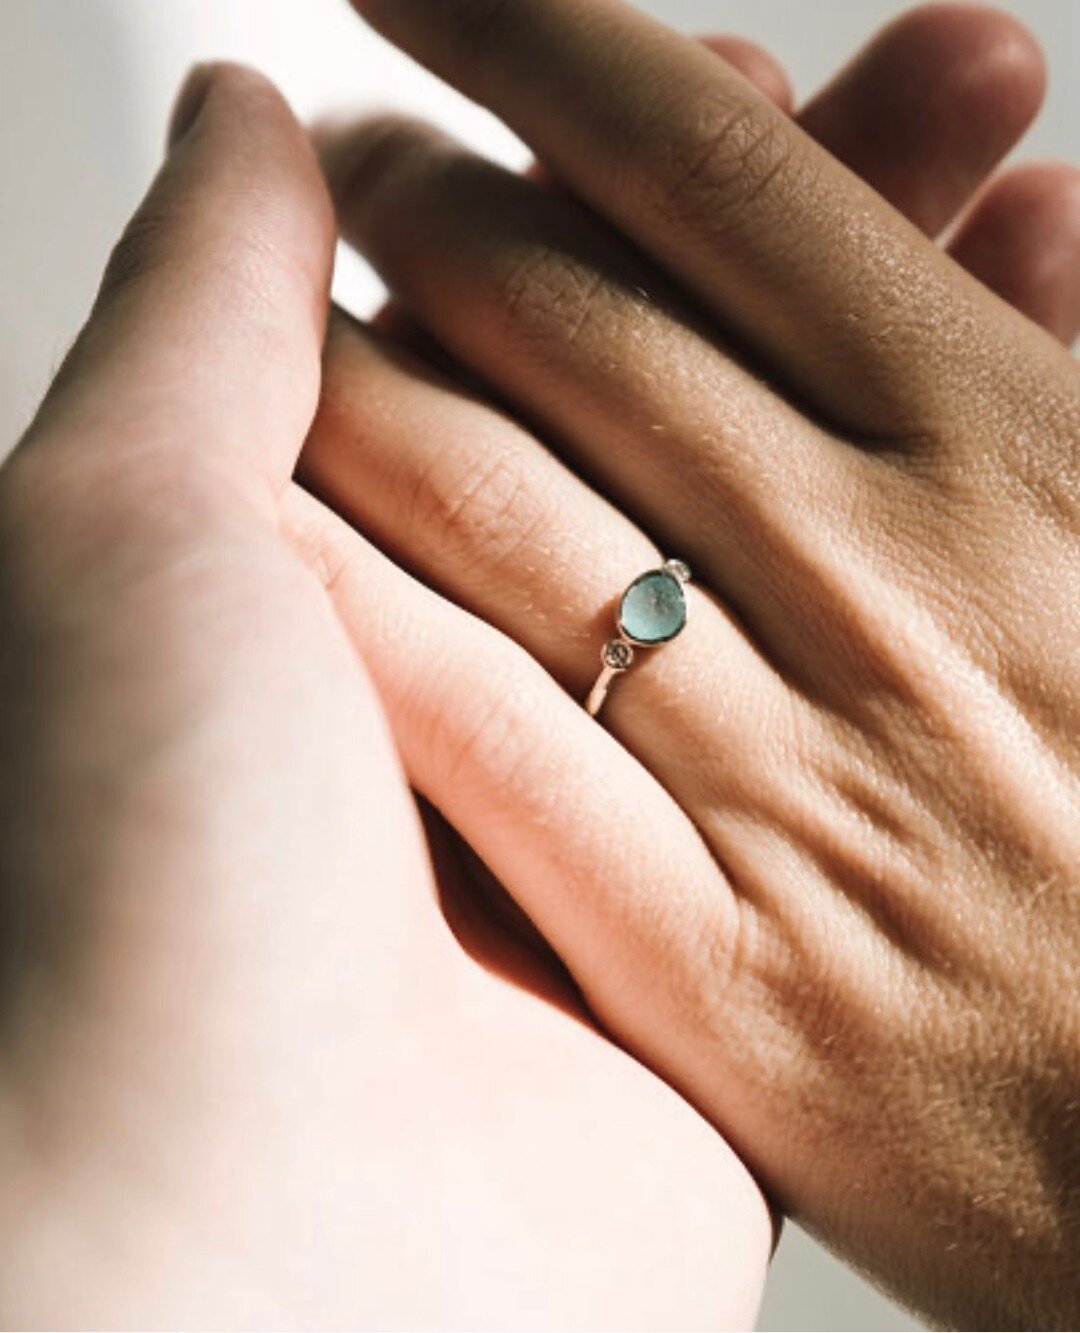 I adore this gorgeous picture of his fianc&eacute;e&rsquo;s Thea engagement ring taken by photographer @iamharrycooke last year 💚

Harry chose the aqua sea glass &amp; white diamond combination, bezel set in white gold, and set in a recycled silver 